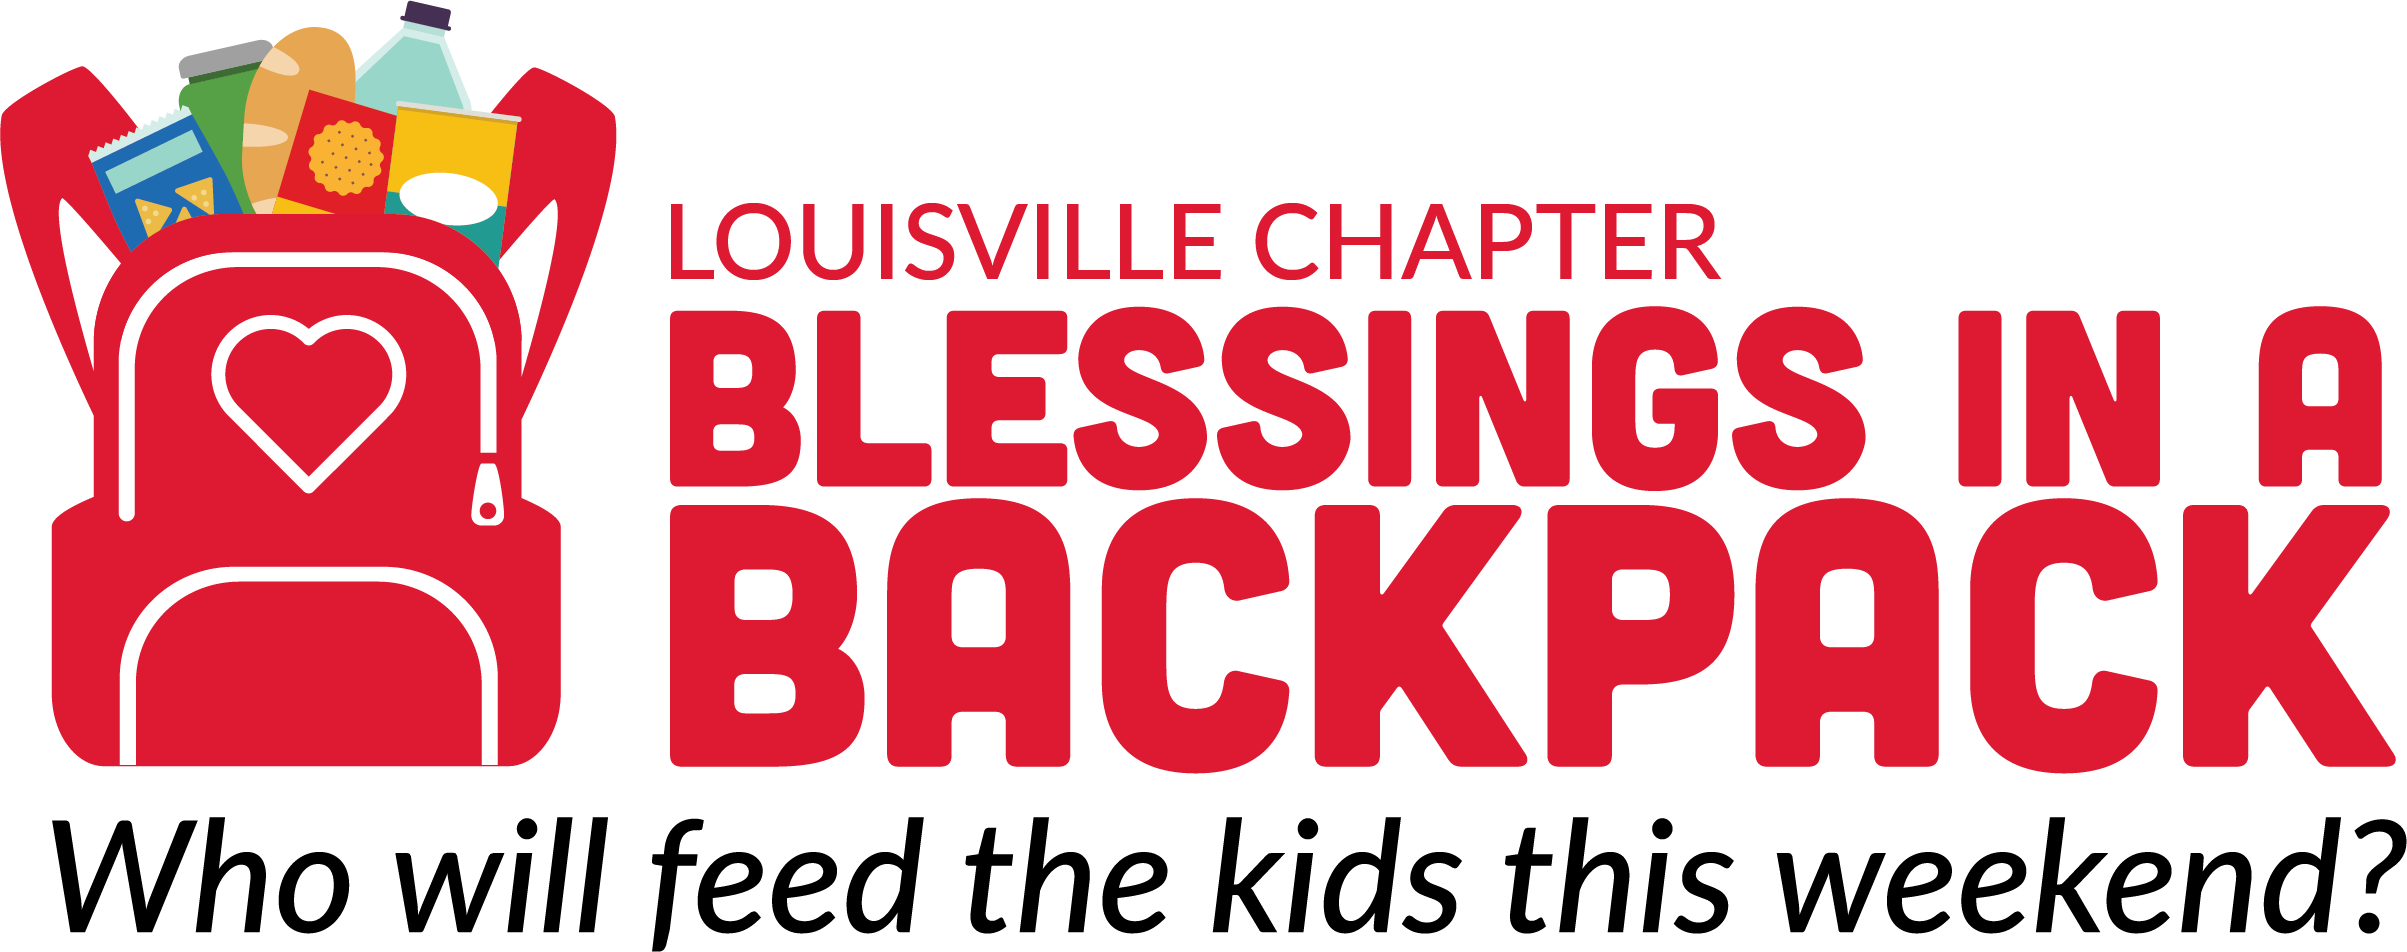 Blessings in a Backpack raises more than $40K at golf scramble in Louisville  - Louisville Chapter